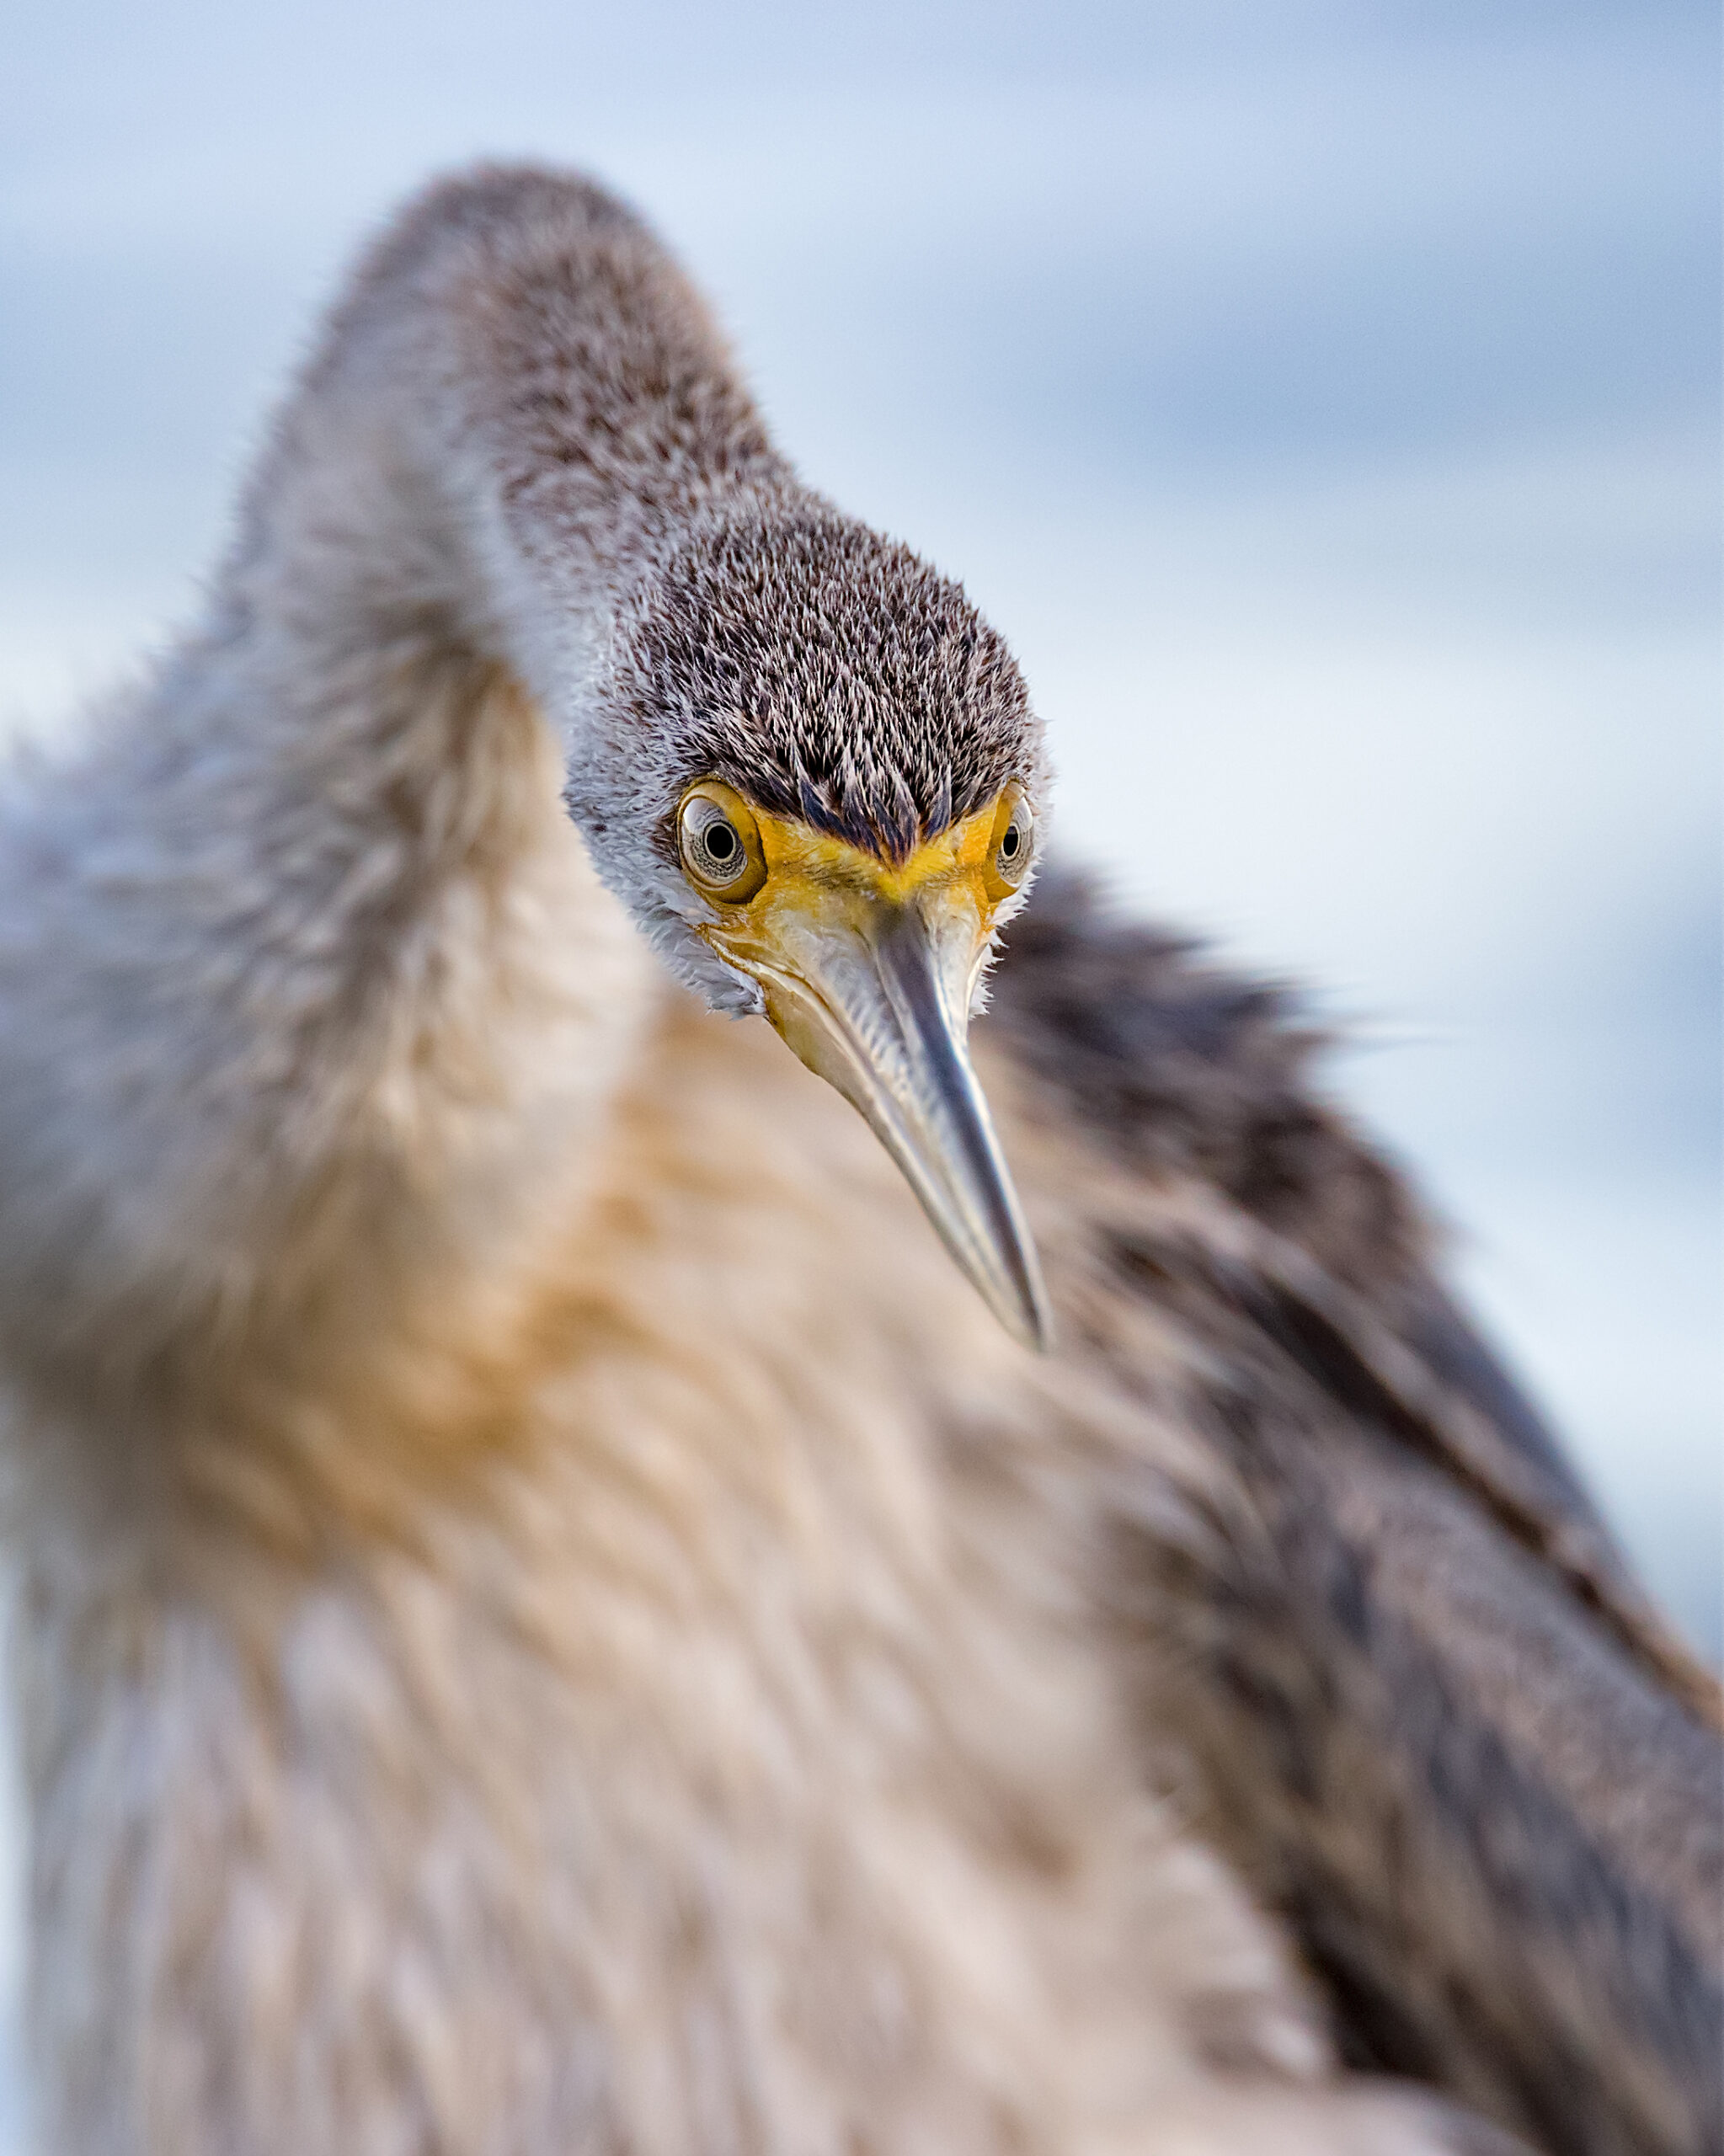 A close-up of a female Australasian Darter staring towards the camera, neck outstretched against a pale blue and white background.